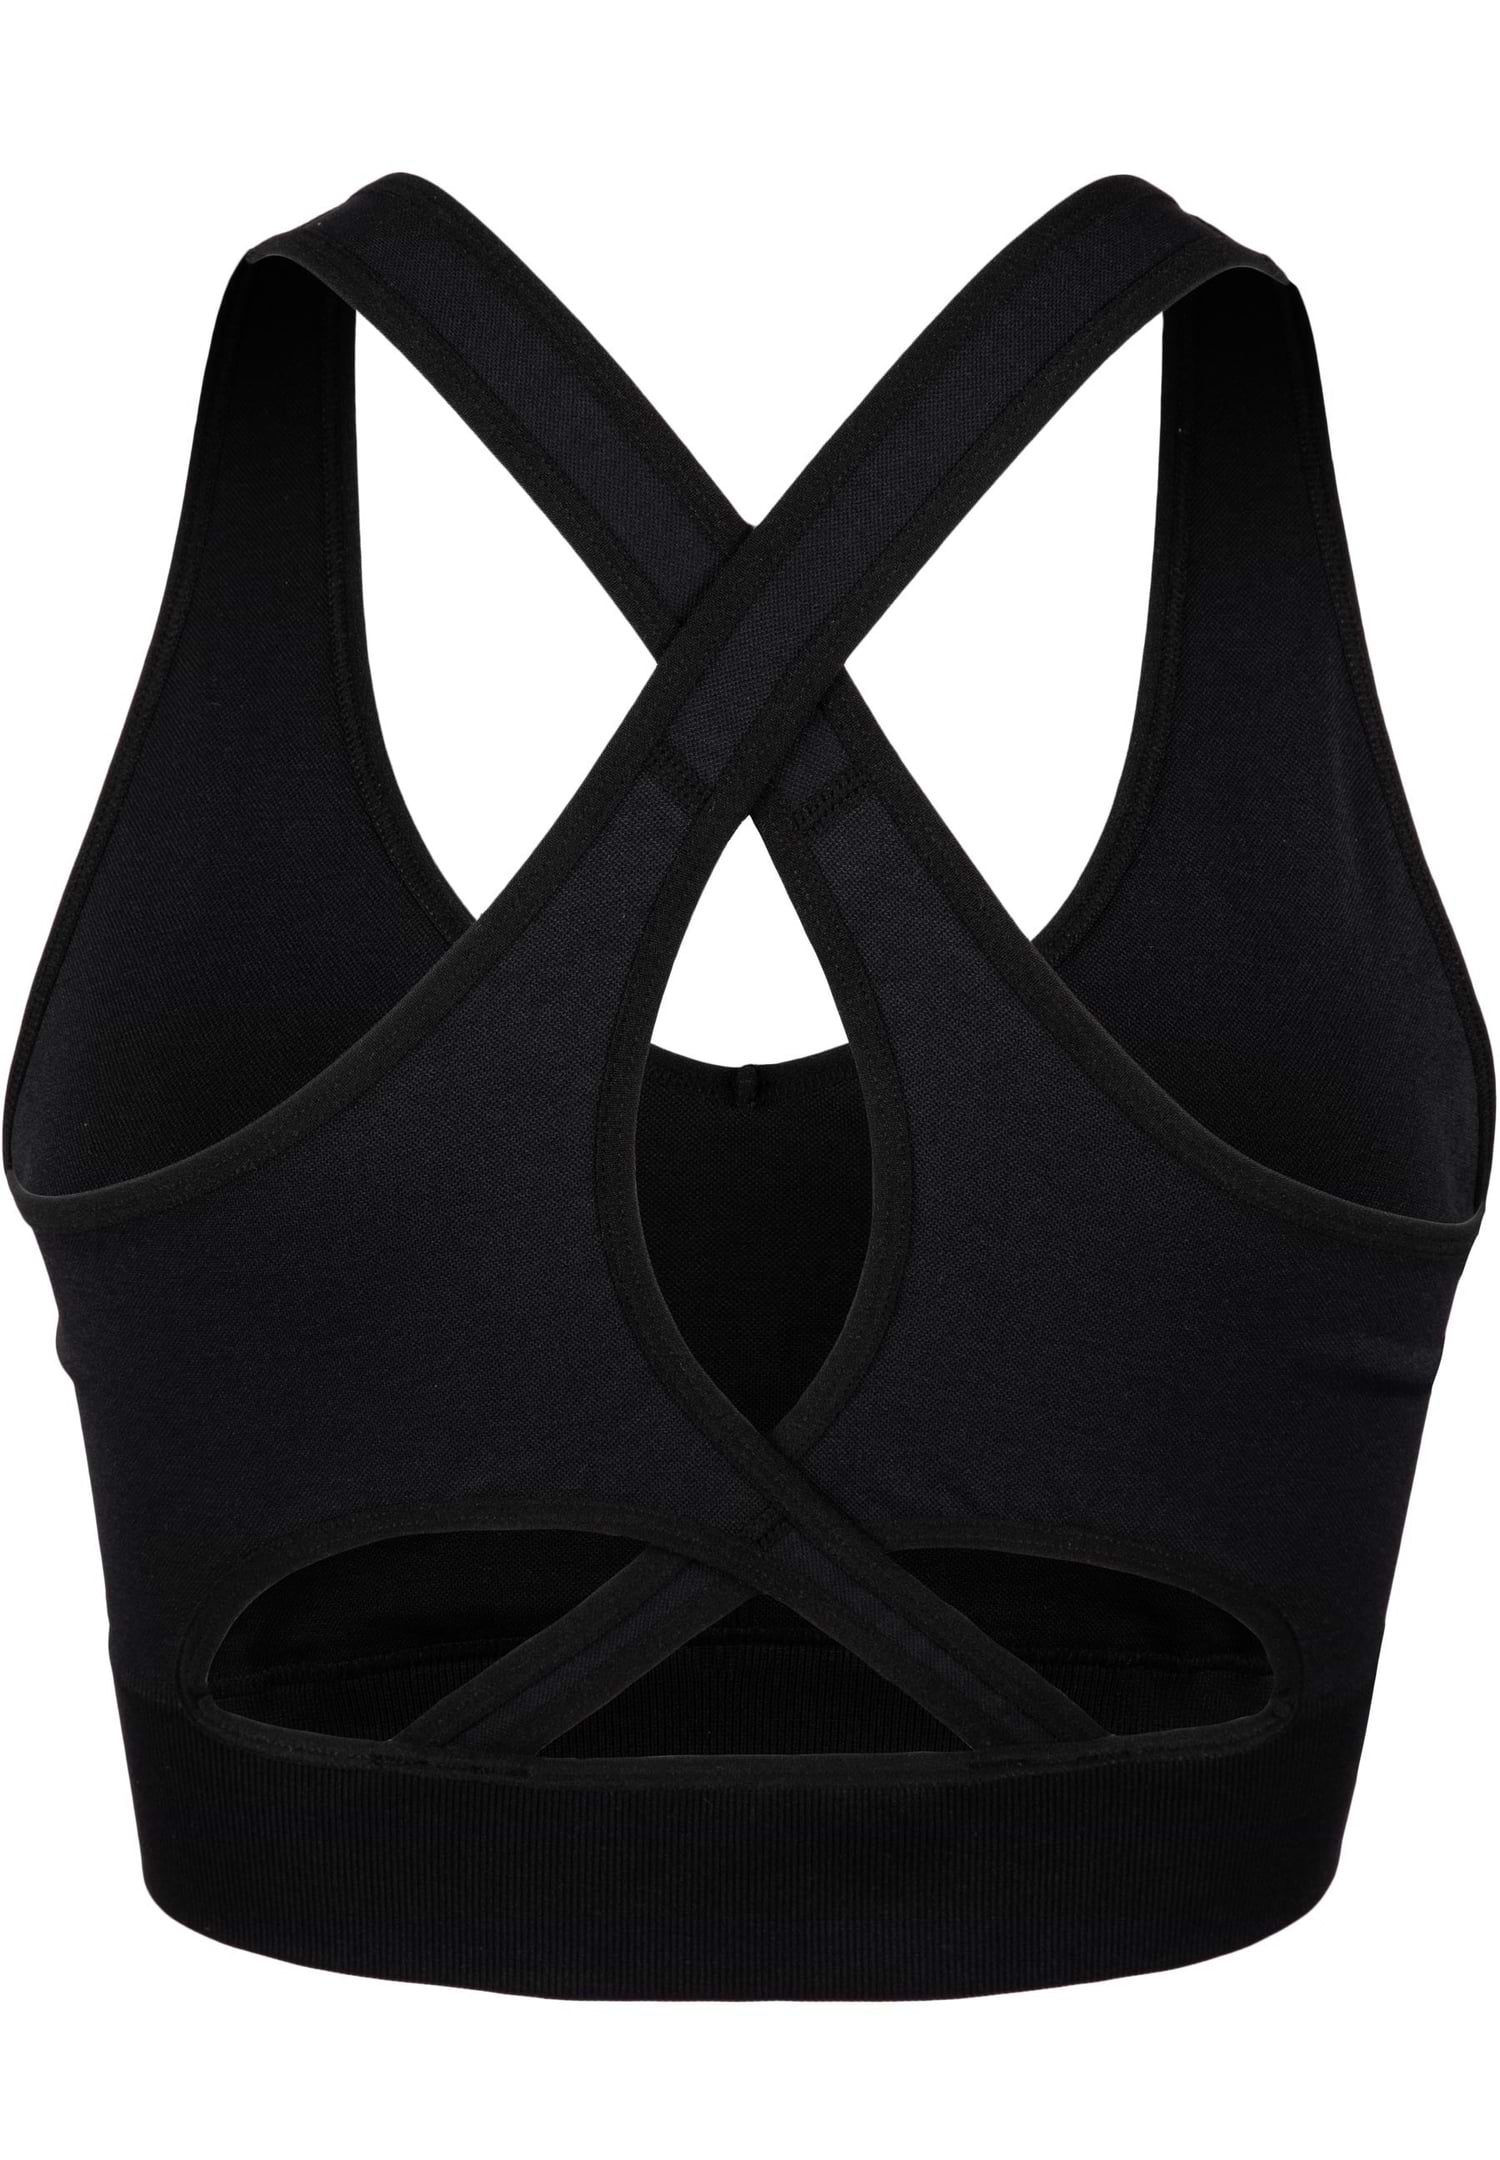 SMLNKOFN Women's Sports Bra Longline Wirefree Padded with Medium Support  Seamless Beauty Back Full Coverage Razorback Gym Bra Black at   Women's Clothing store